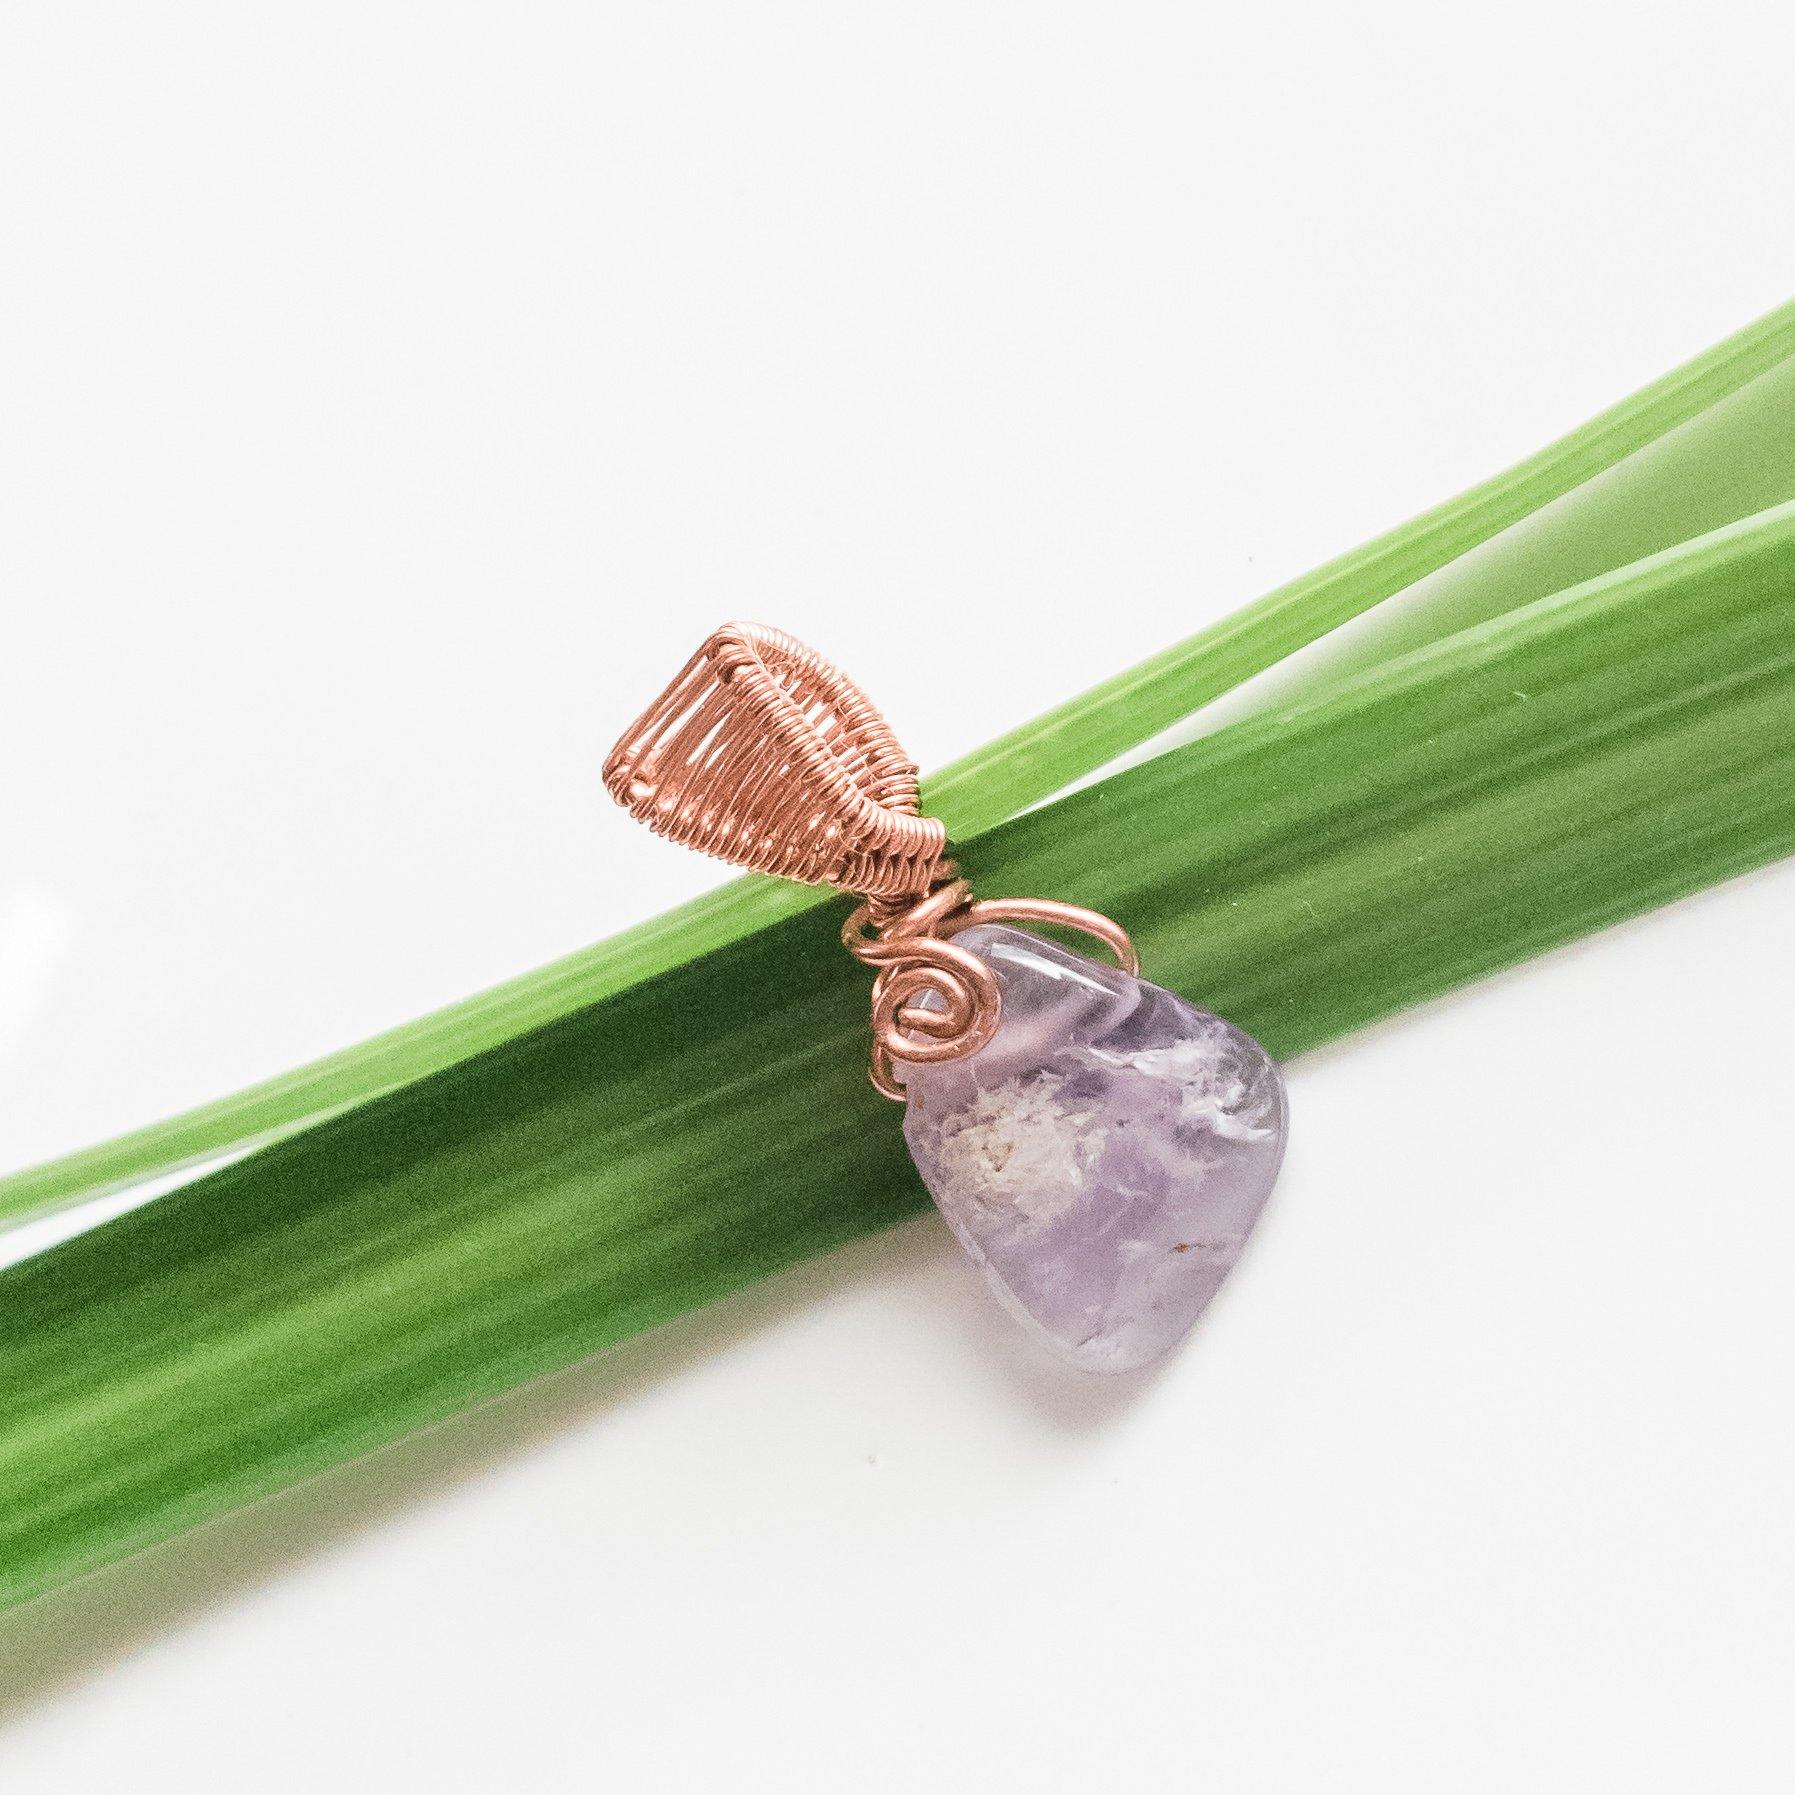 Dainty Amethyst Triangle Stone in Copper Pendant - close up view - BellaChel Jeweler